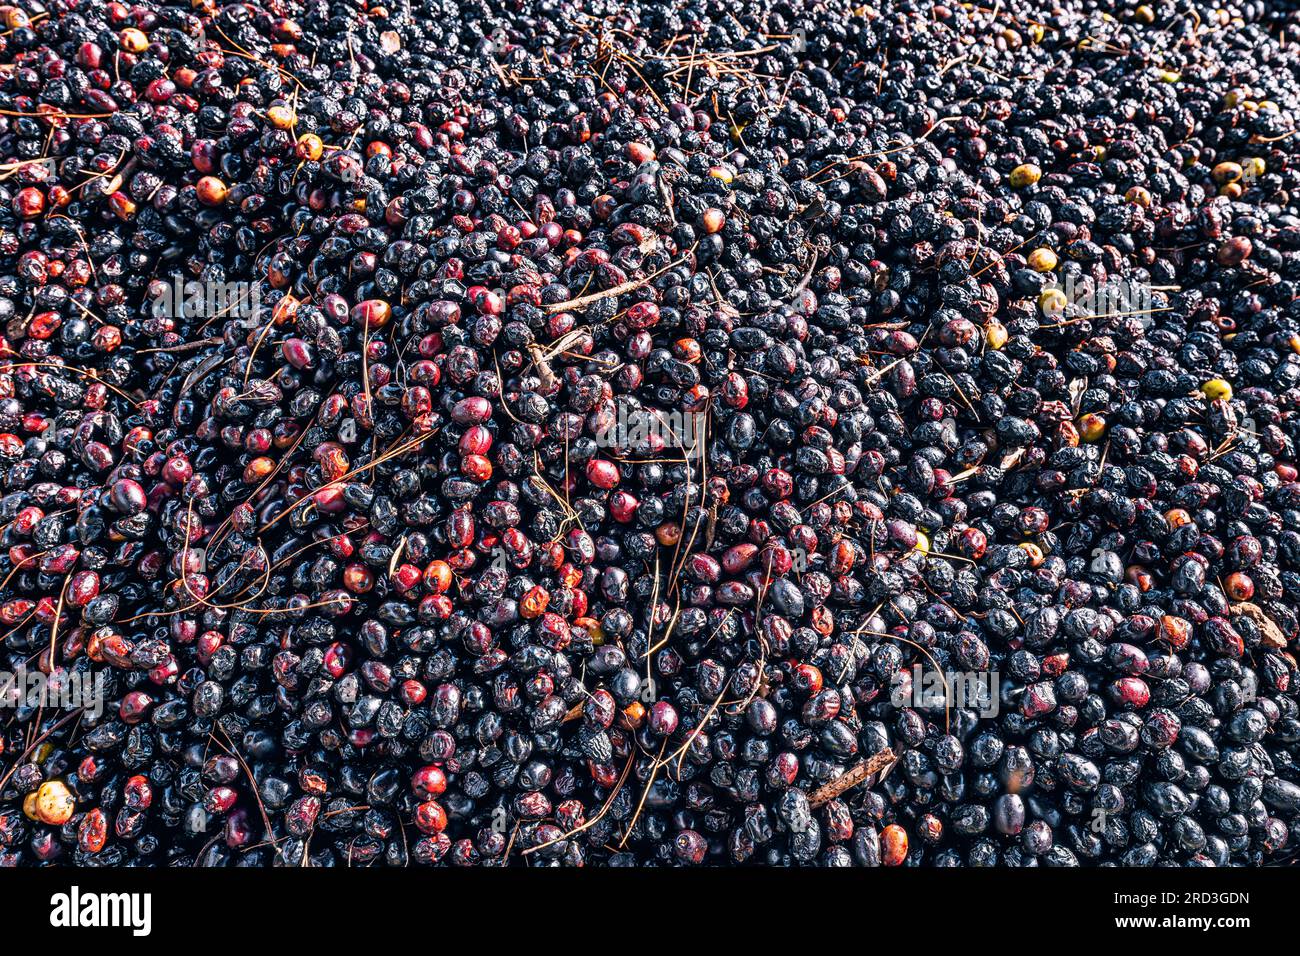 process of drying olives, showcasing the transformation from plump fruits to shriveled, dark delicacies. Stock Photo